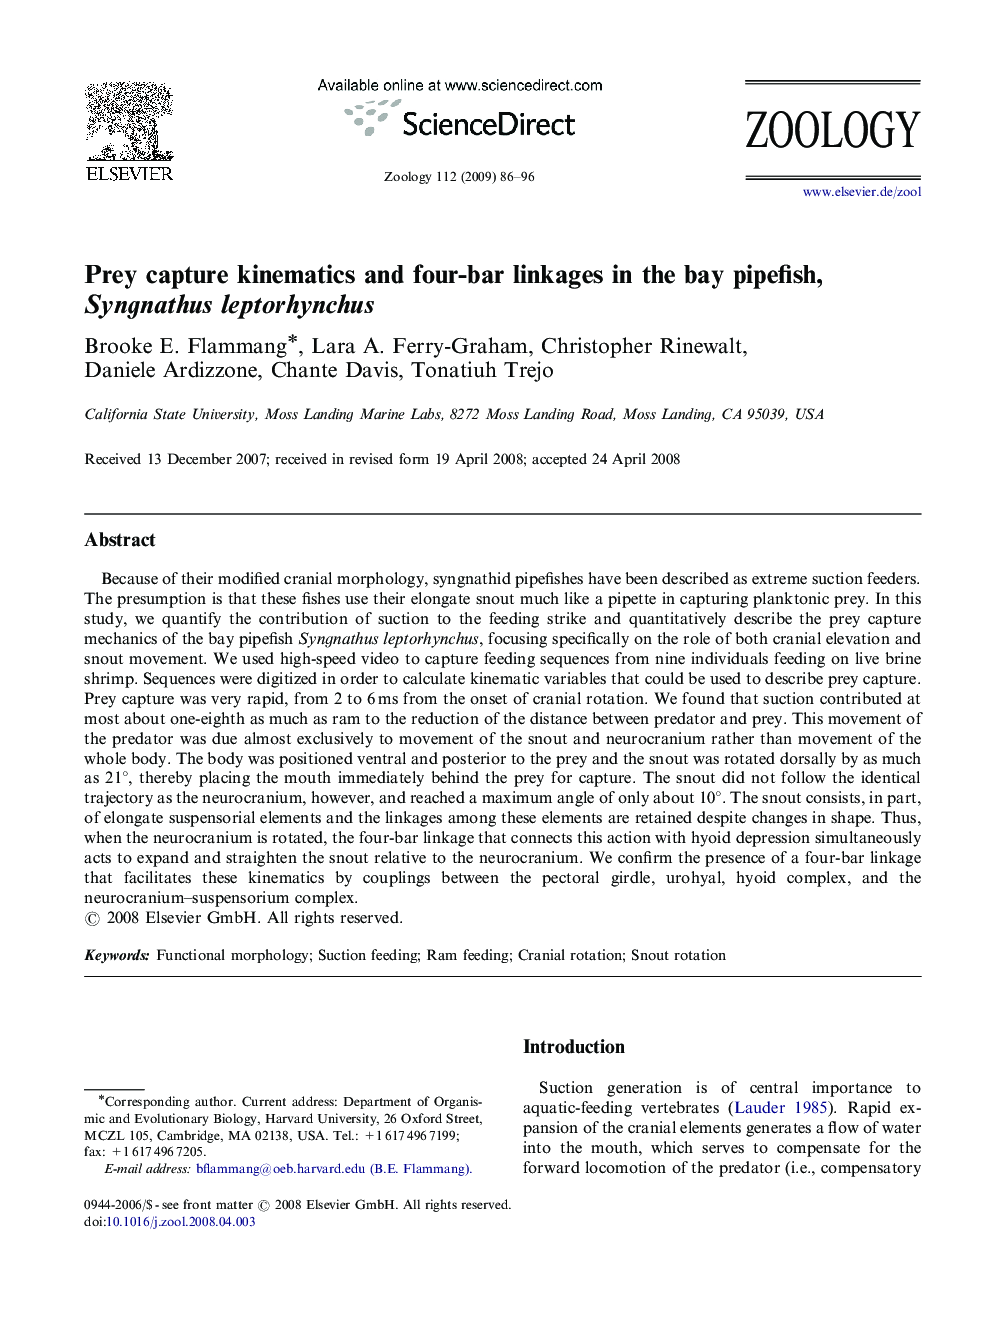 Prey capture kinematics and four-bar linkages in the bay pipefish, Syngnathus leptorhynchus